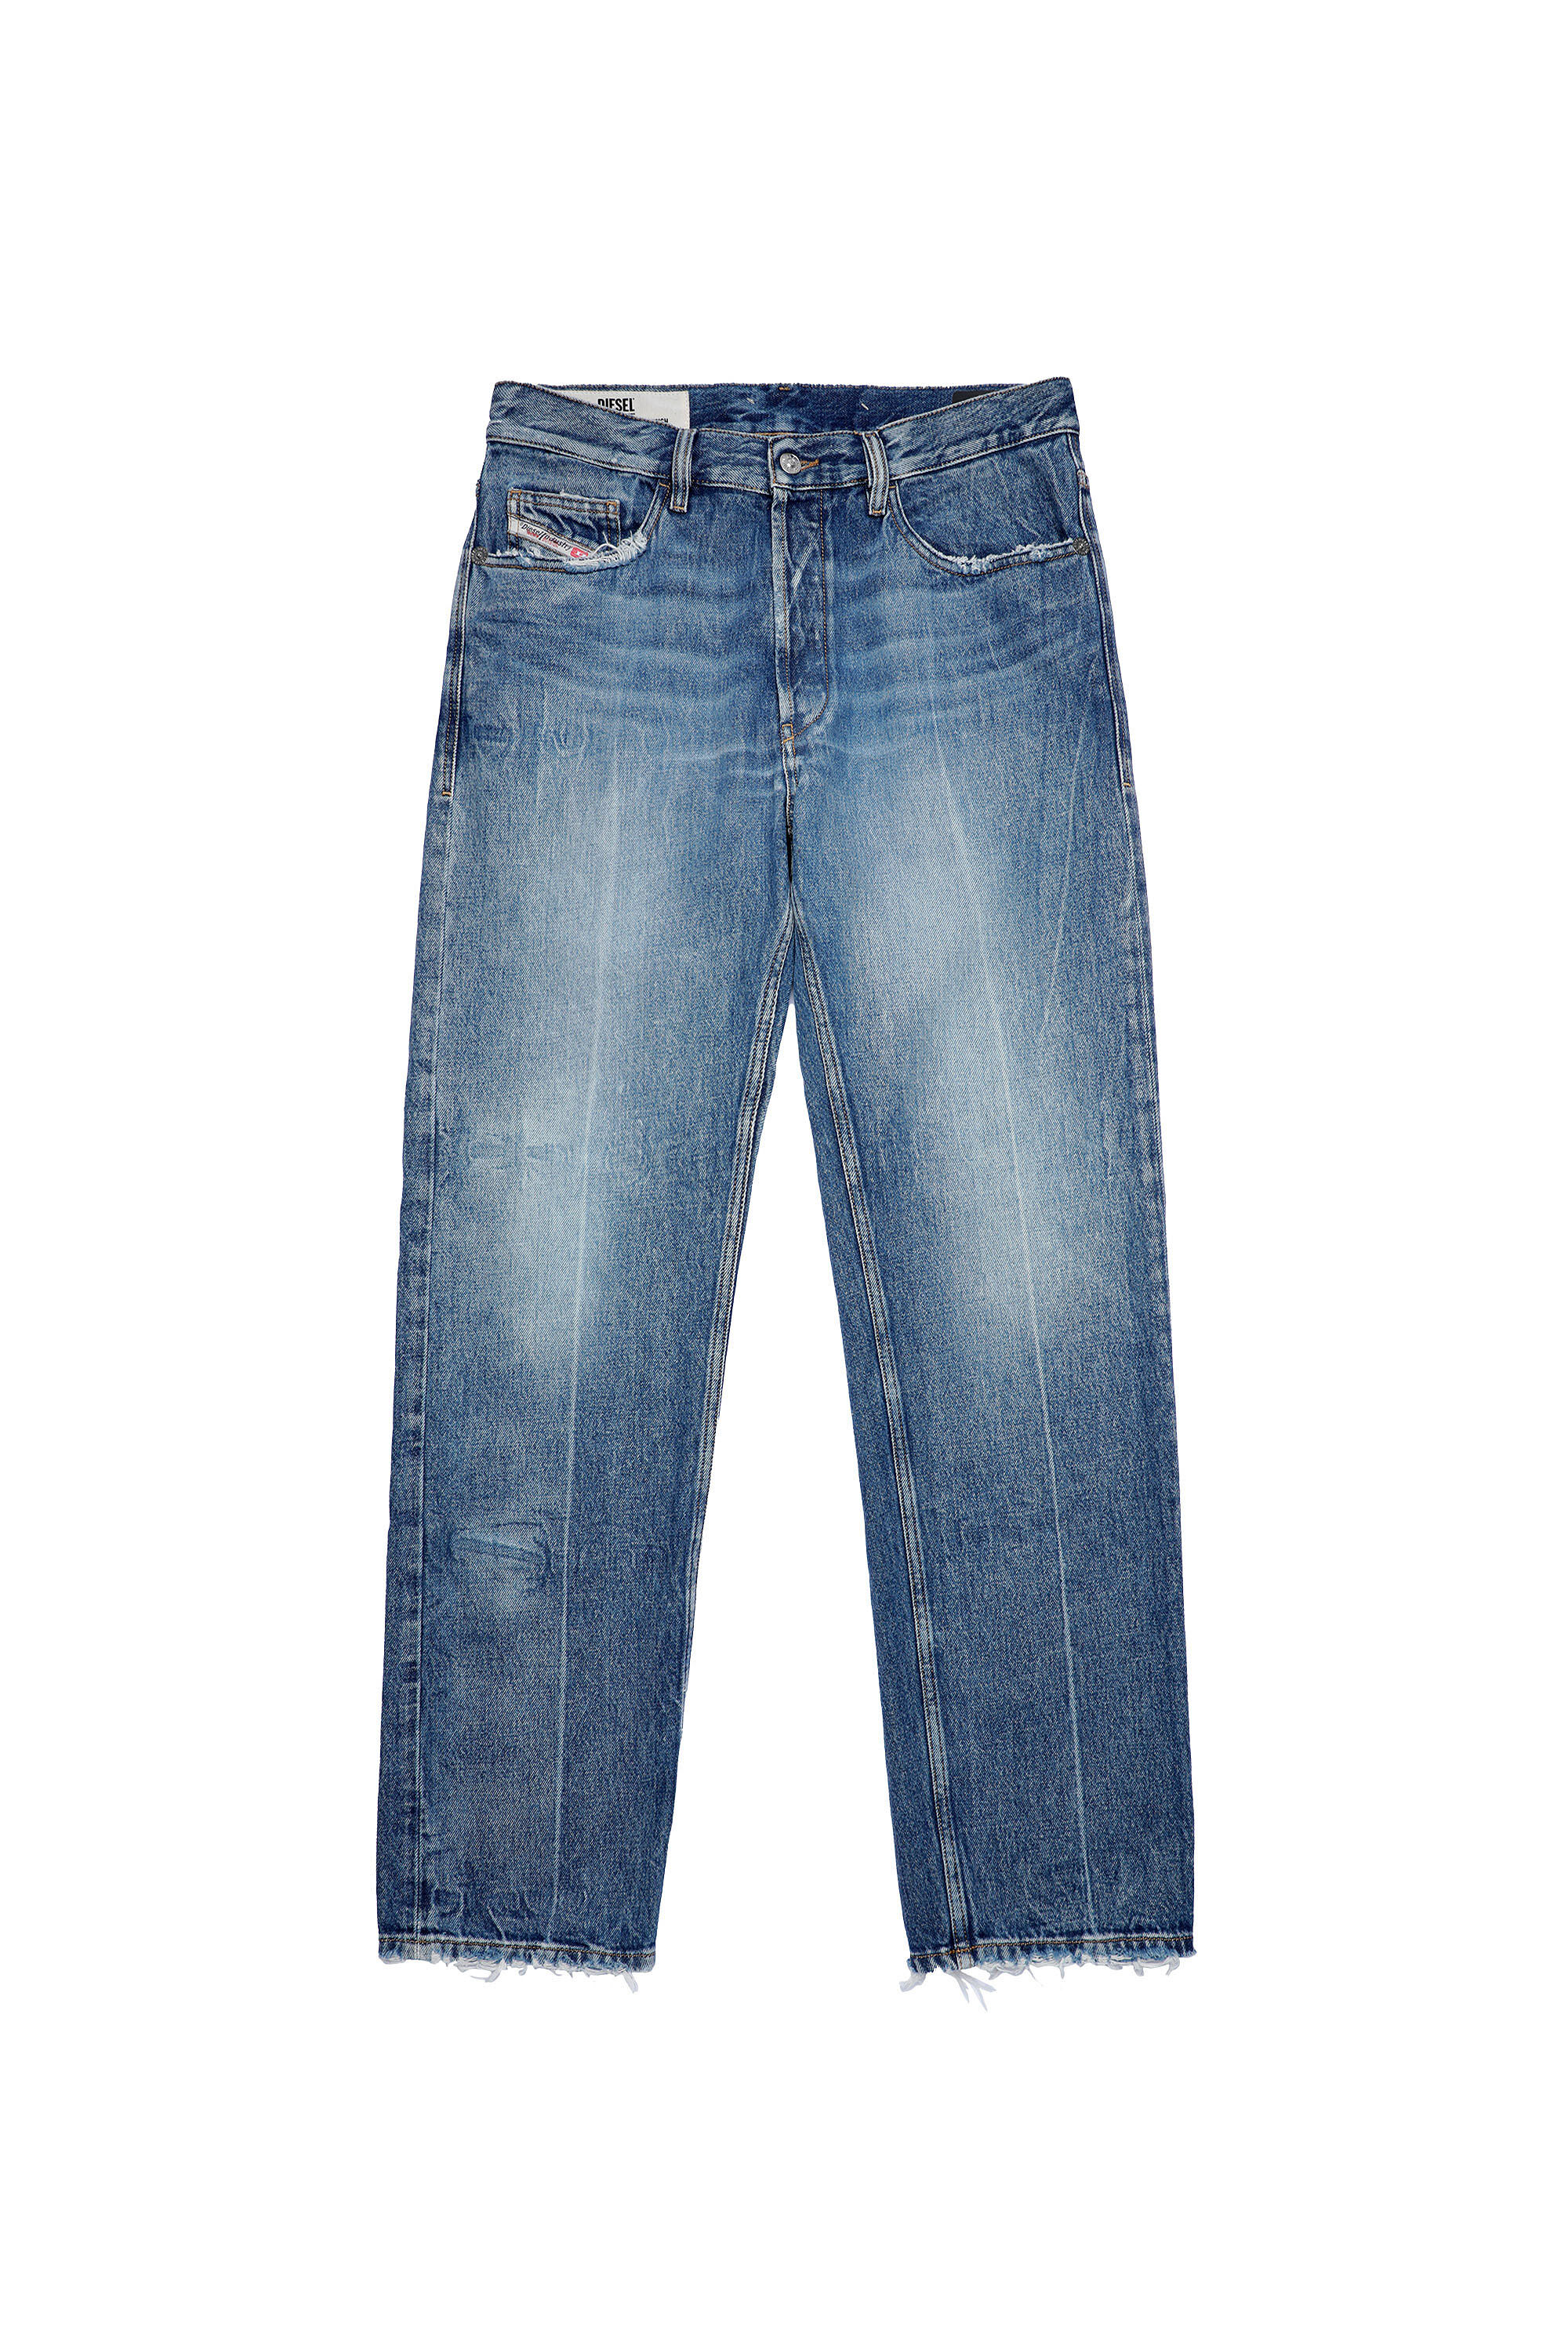 Diesel - D-Macs 09A25 Straight Jeans,  - Image 2